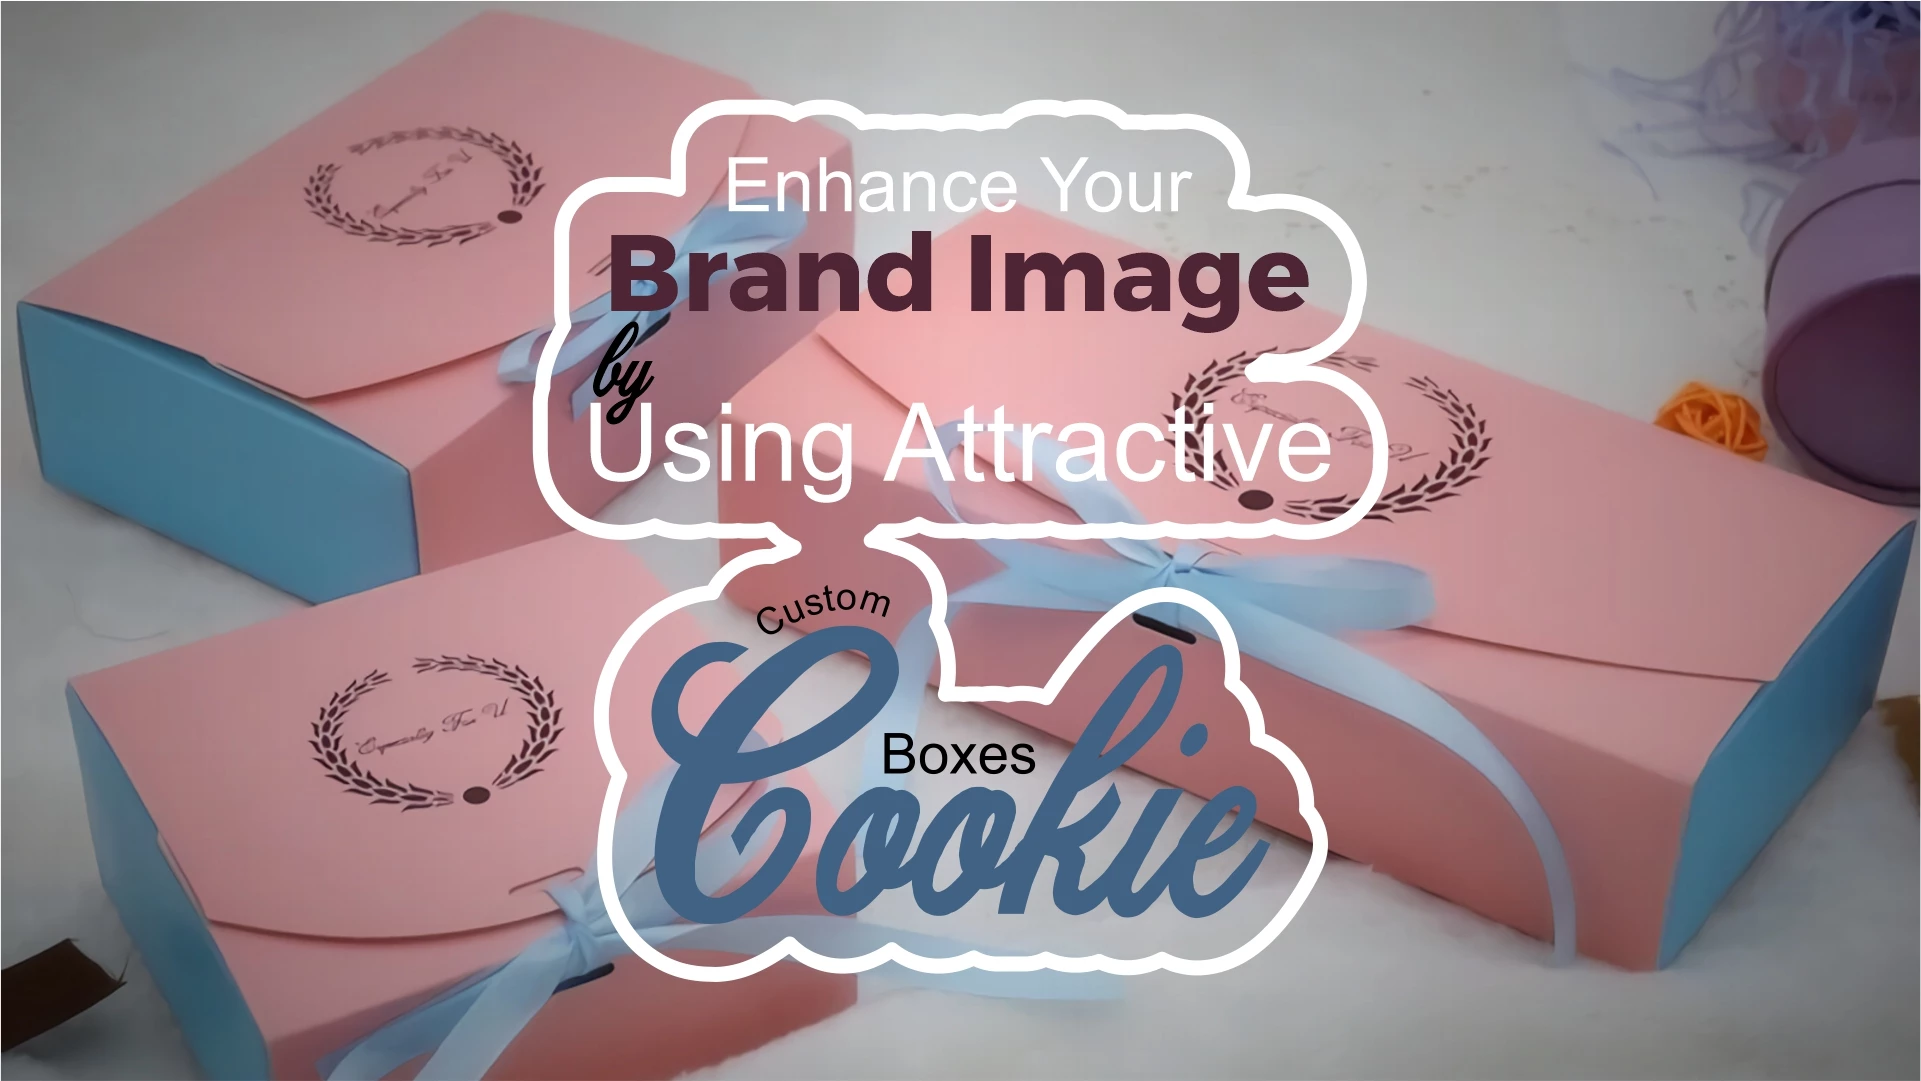 Enhance Your Brand Image by Using Attractive Custom Cookie Boxes